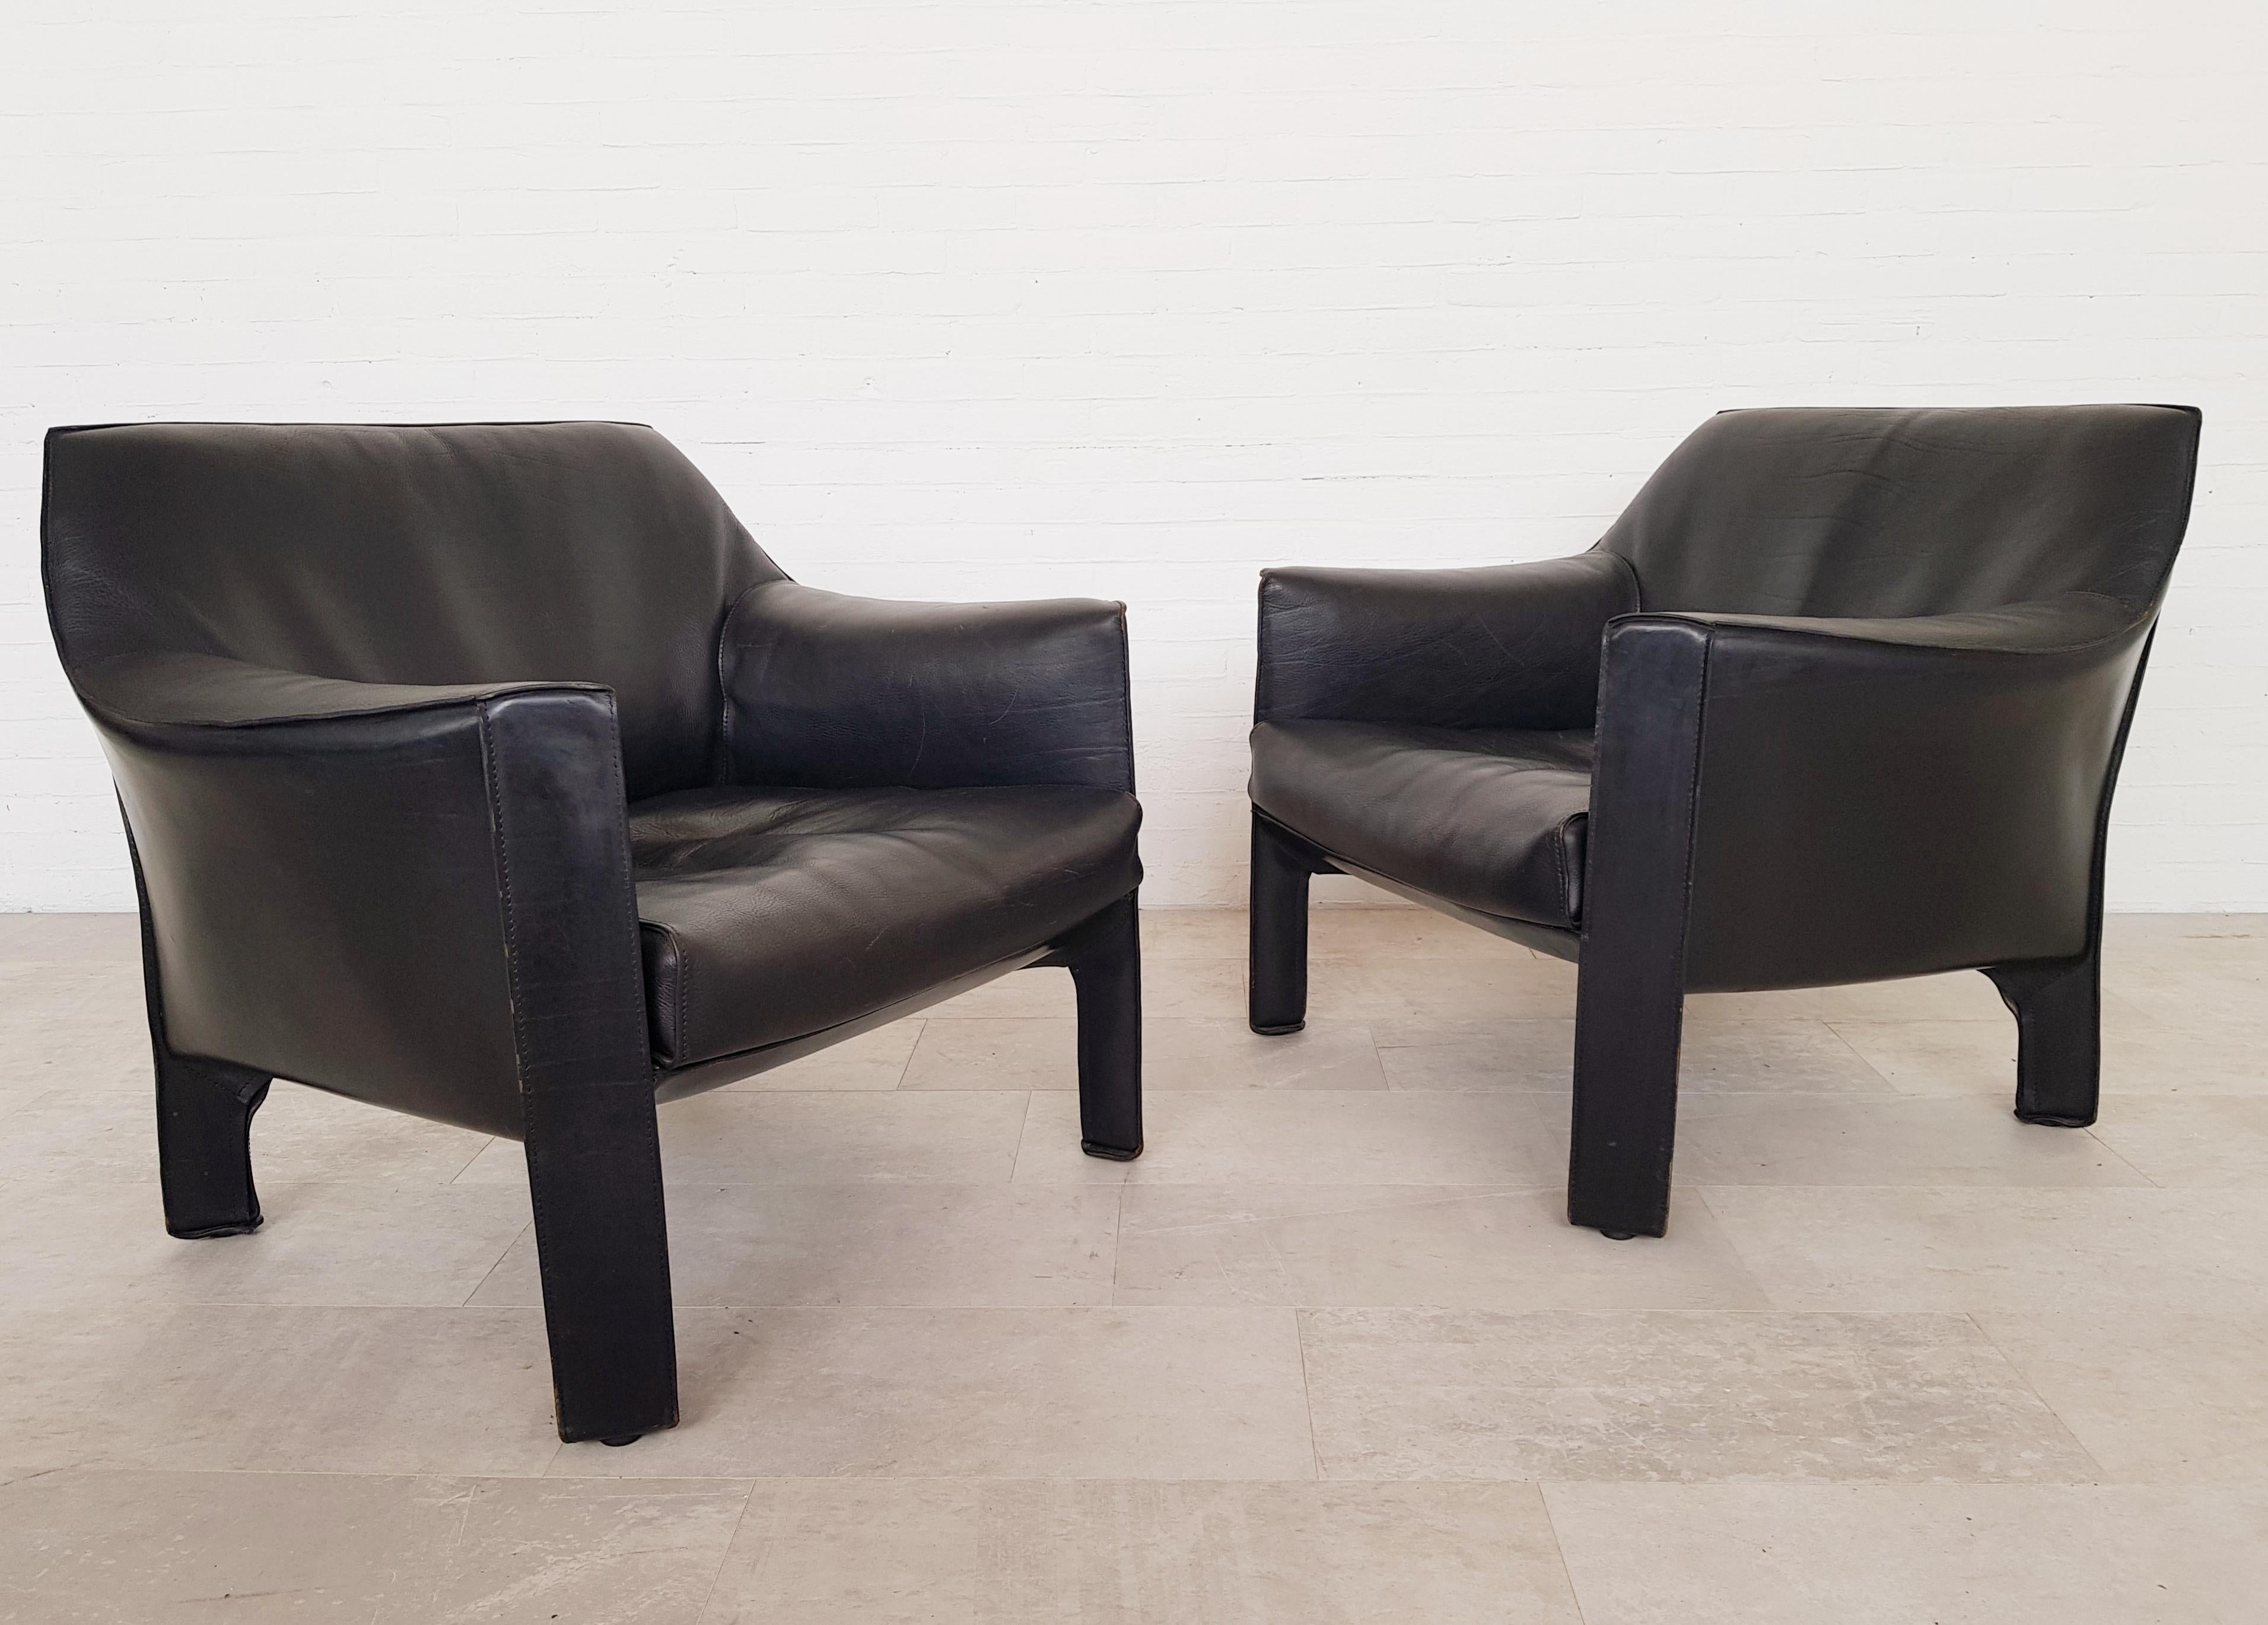 Cassina CAB 415 lounge chairs by Mario Bellini for Cassina, 1980s

The CAB chair has an enamelled steel frame, the very strong black buffalo leather upholstery is zippered over the frame.